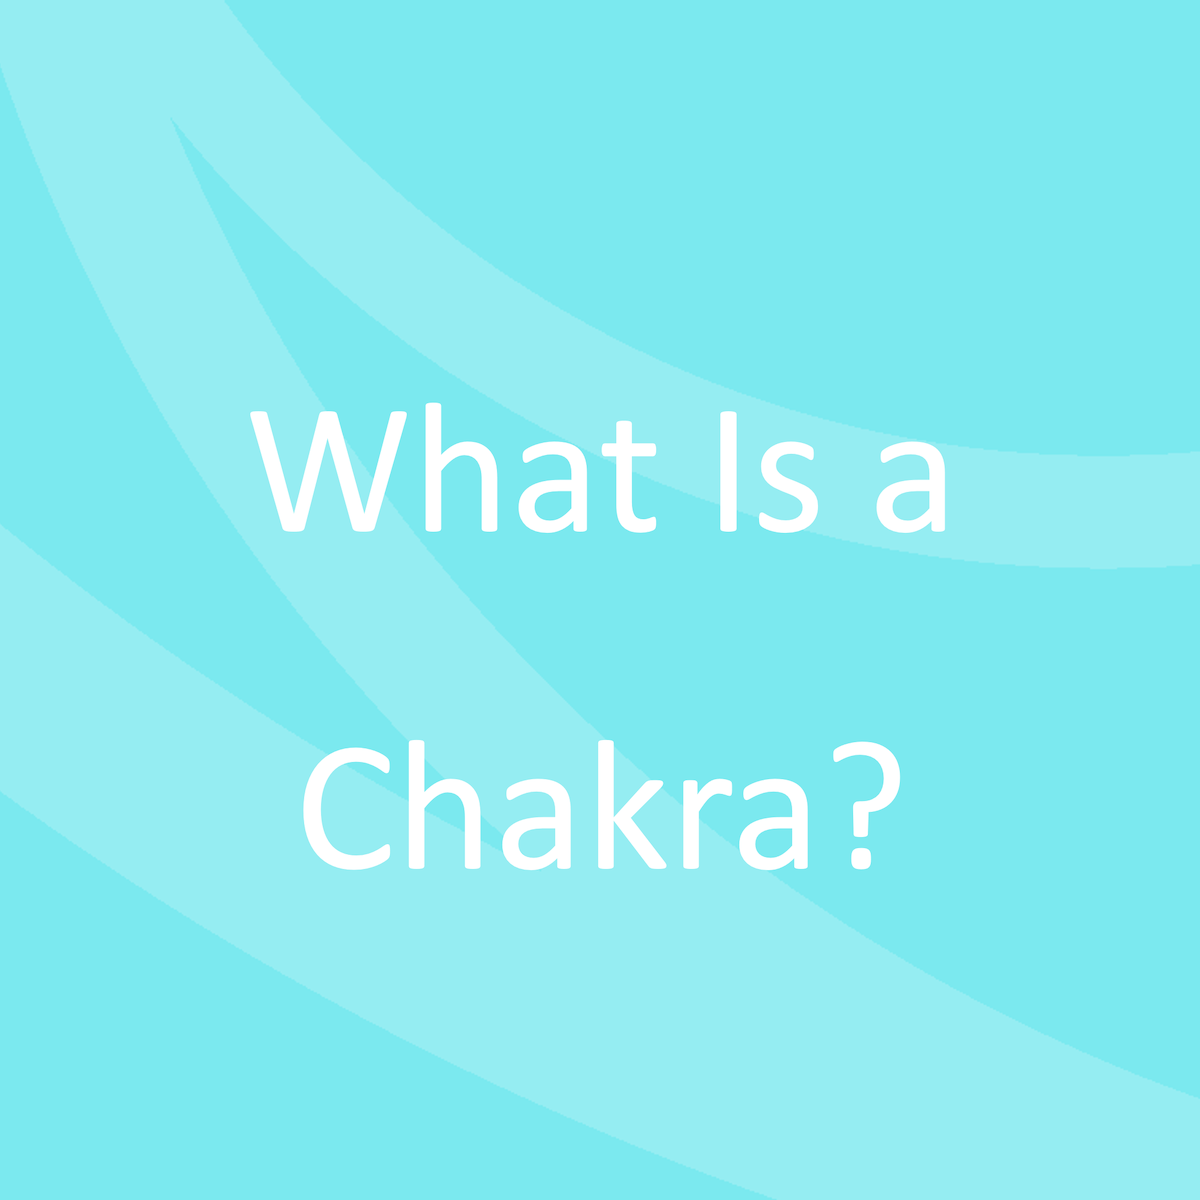 Wat is een chakra | Alles over chakra's | Lead a normal life https://leadanormallife.com